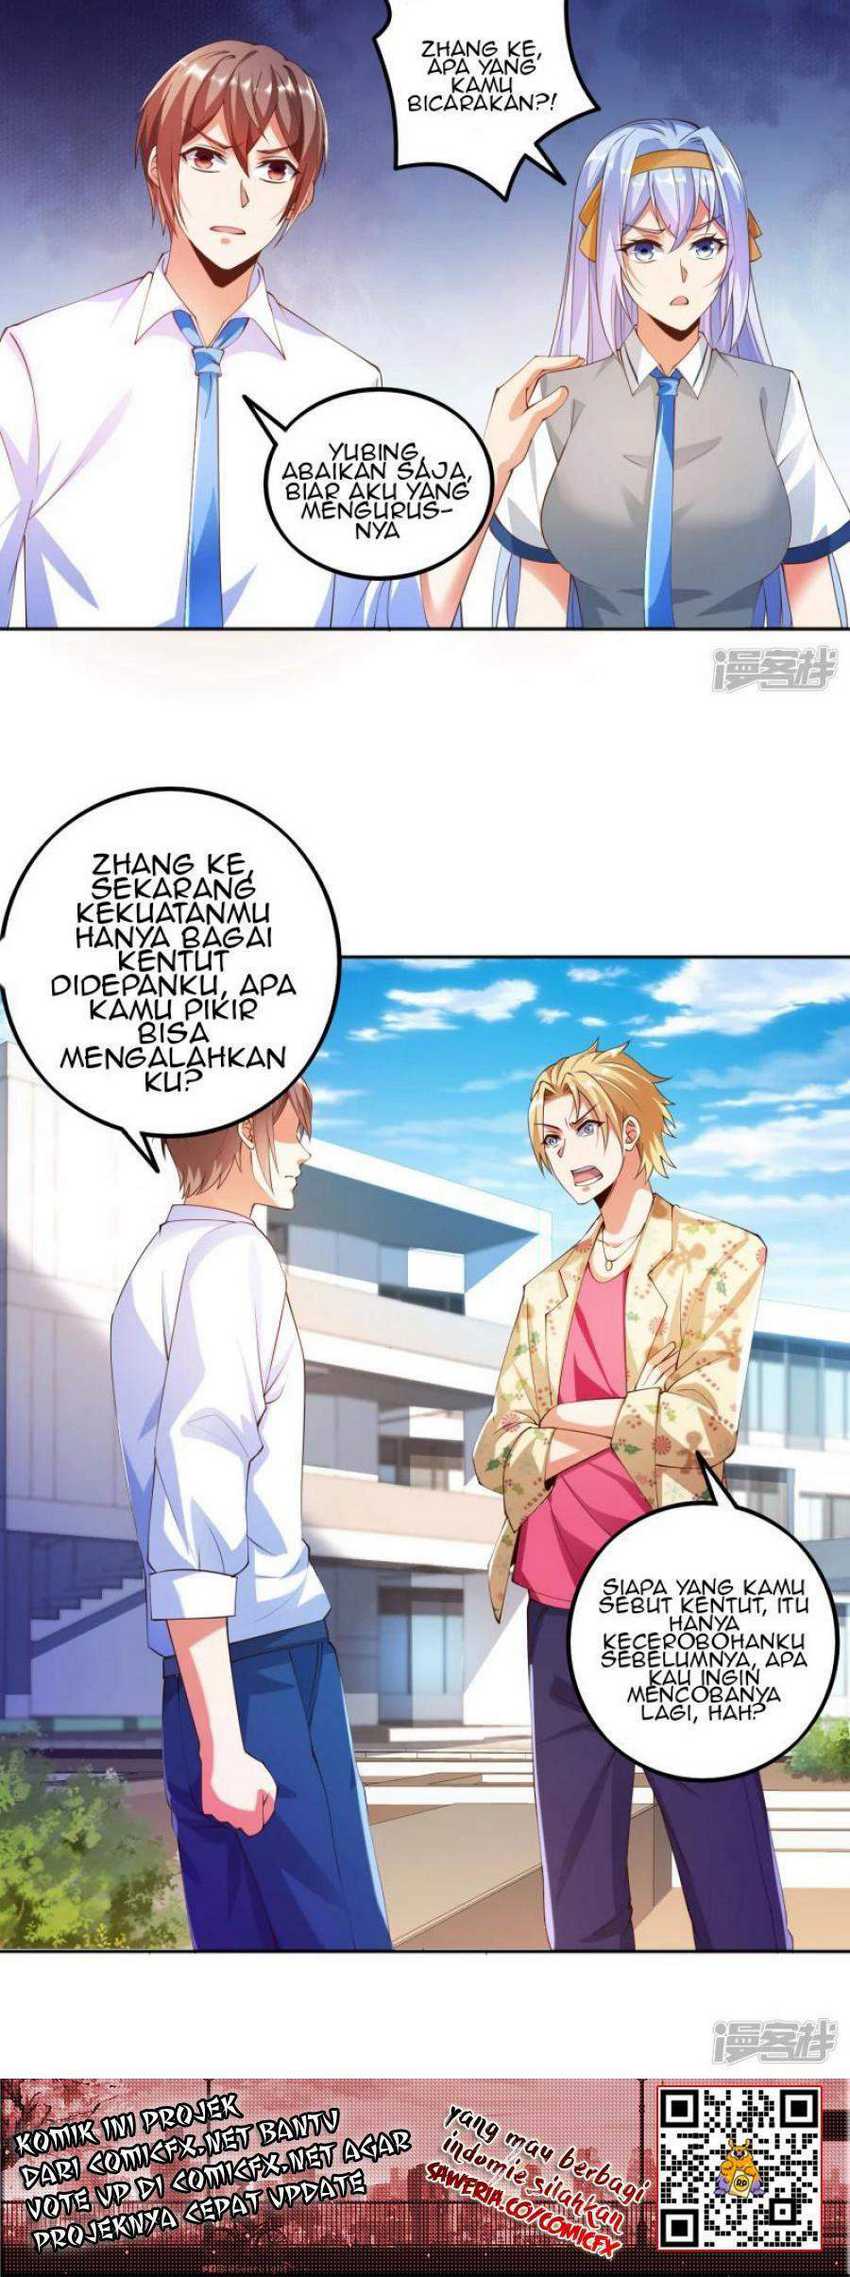 Become A God Chapter 12 bahasa indonesia